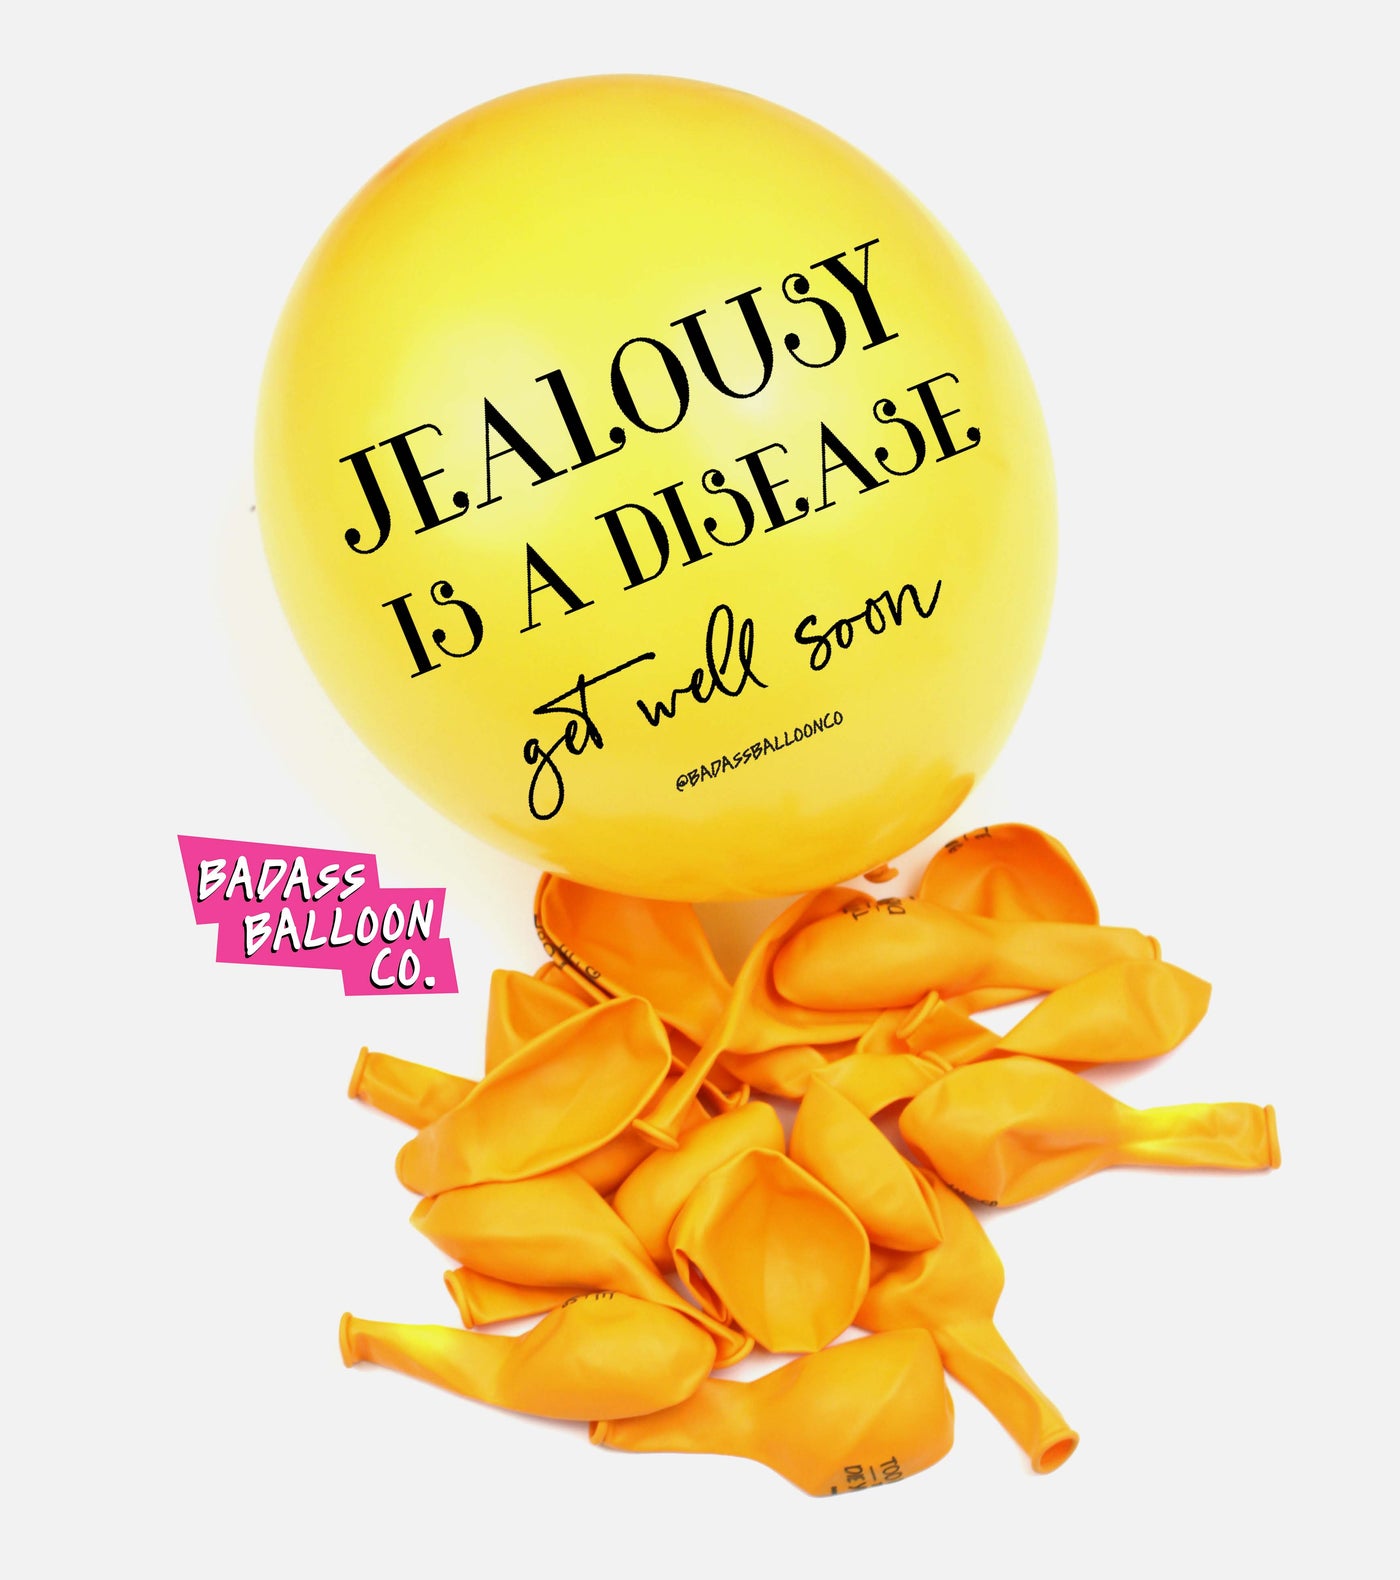 Jealousy is a Disease. Get Well Soon. Badass Balloons. Biodegradable Party Balloons.